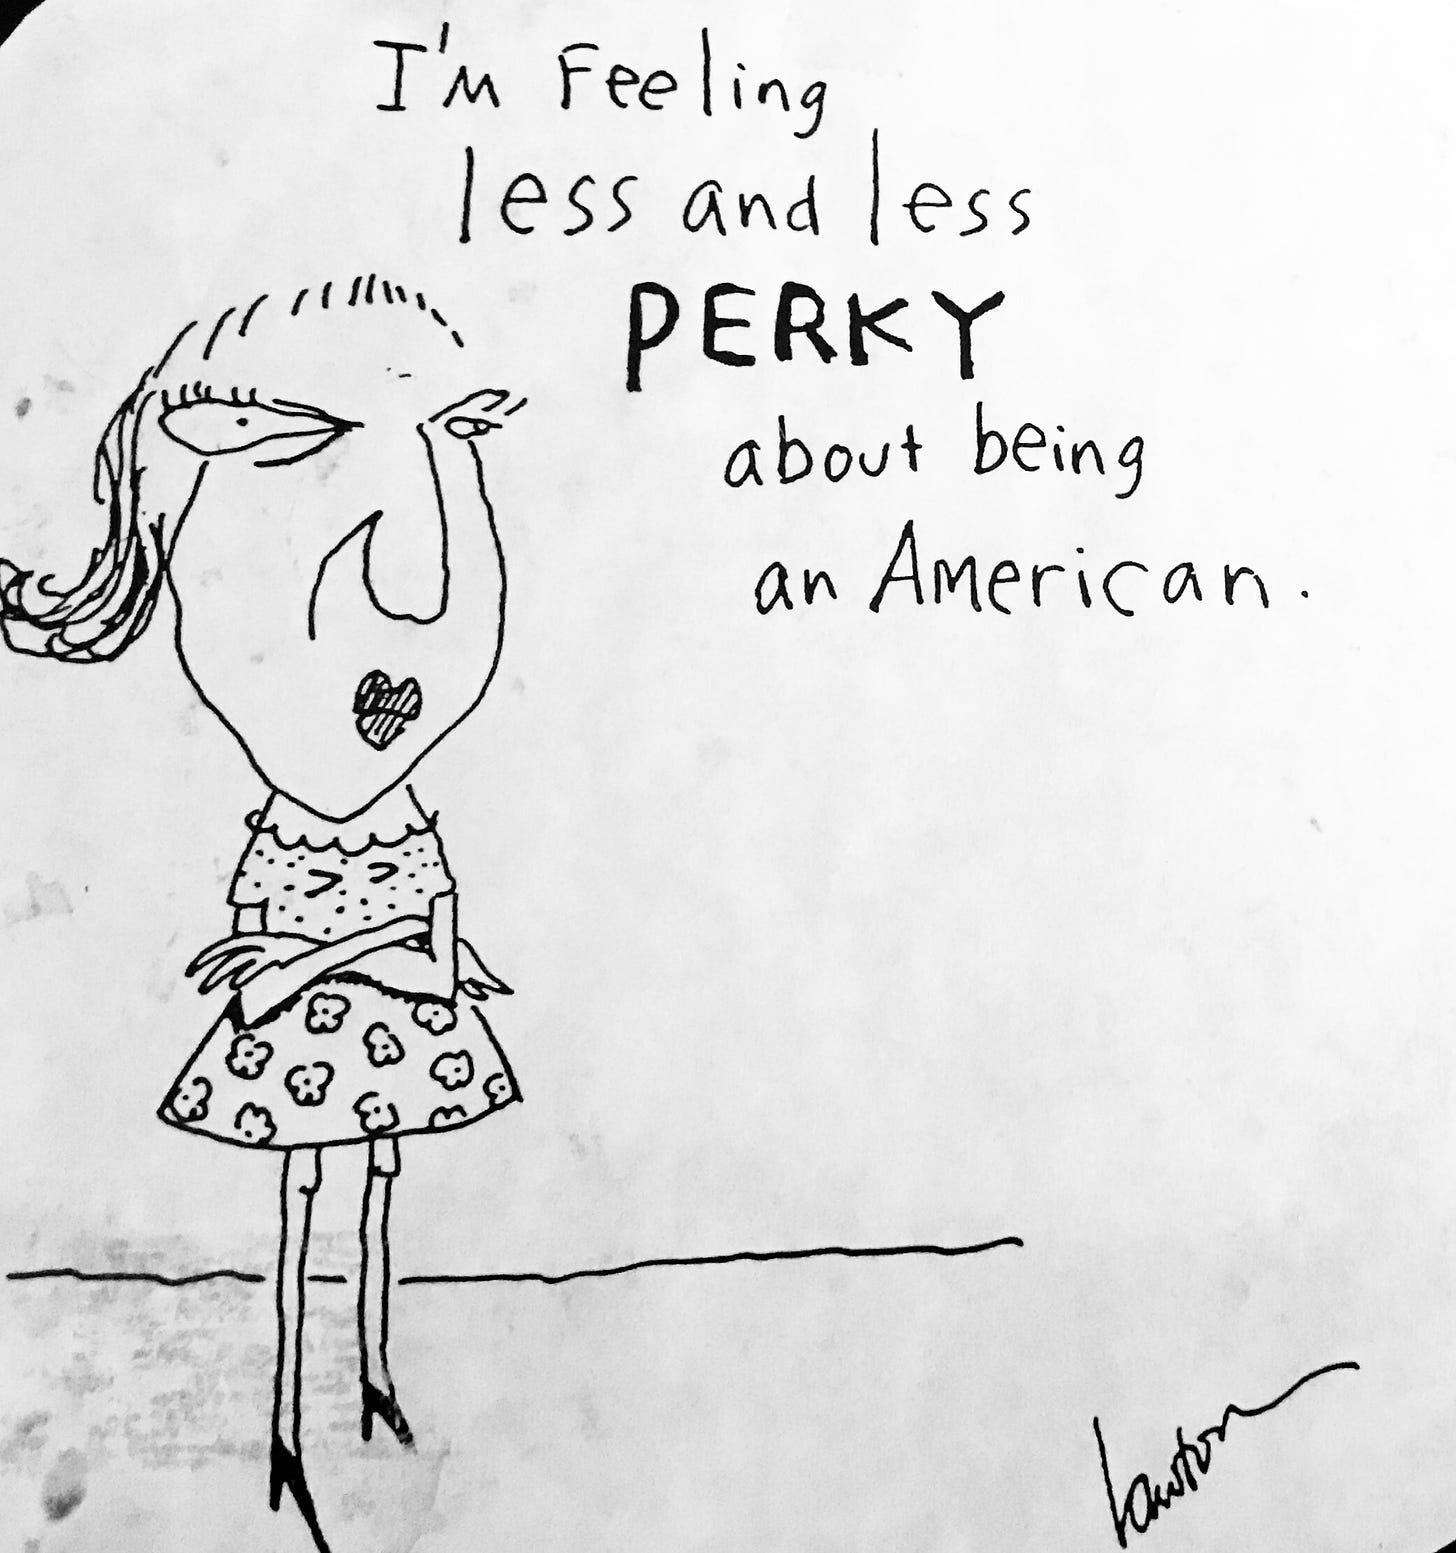 Cartoon of woman saying “I’m feeling less and less perky about being an American.”